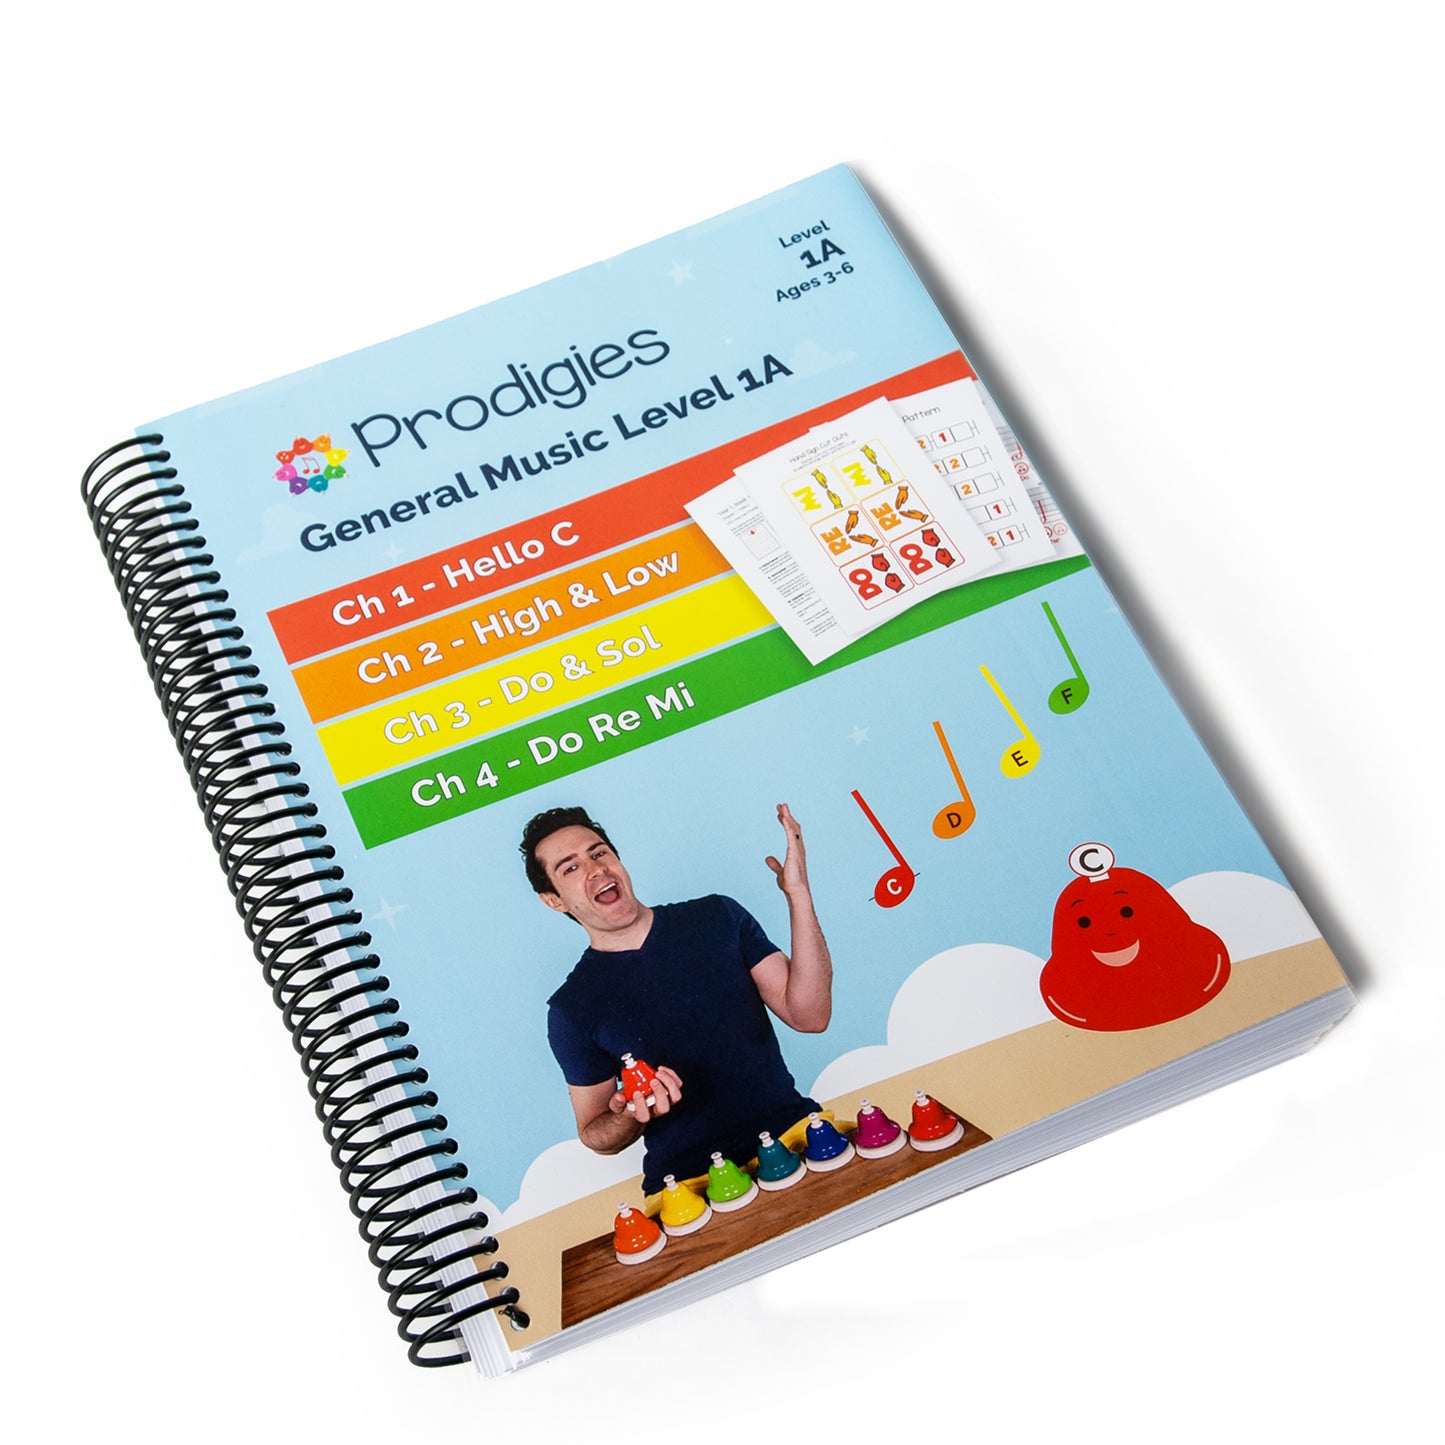 General Music Level 1A Workbook (Level 1, Chapters 1-4)